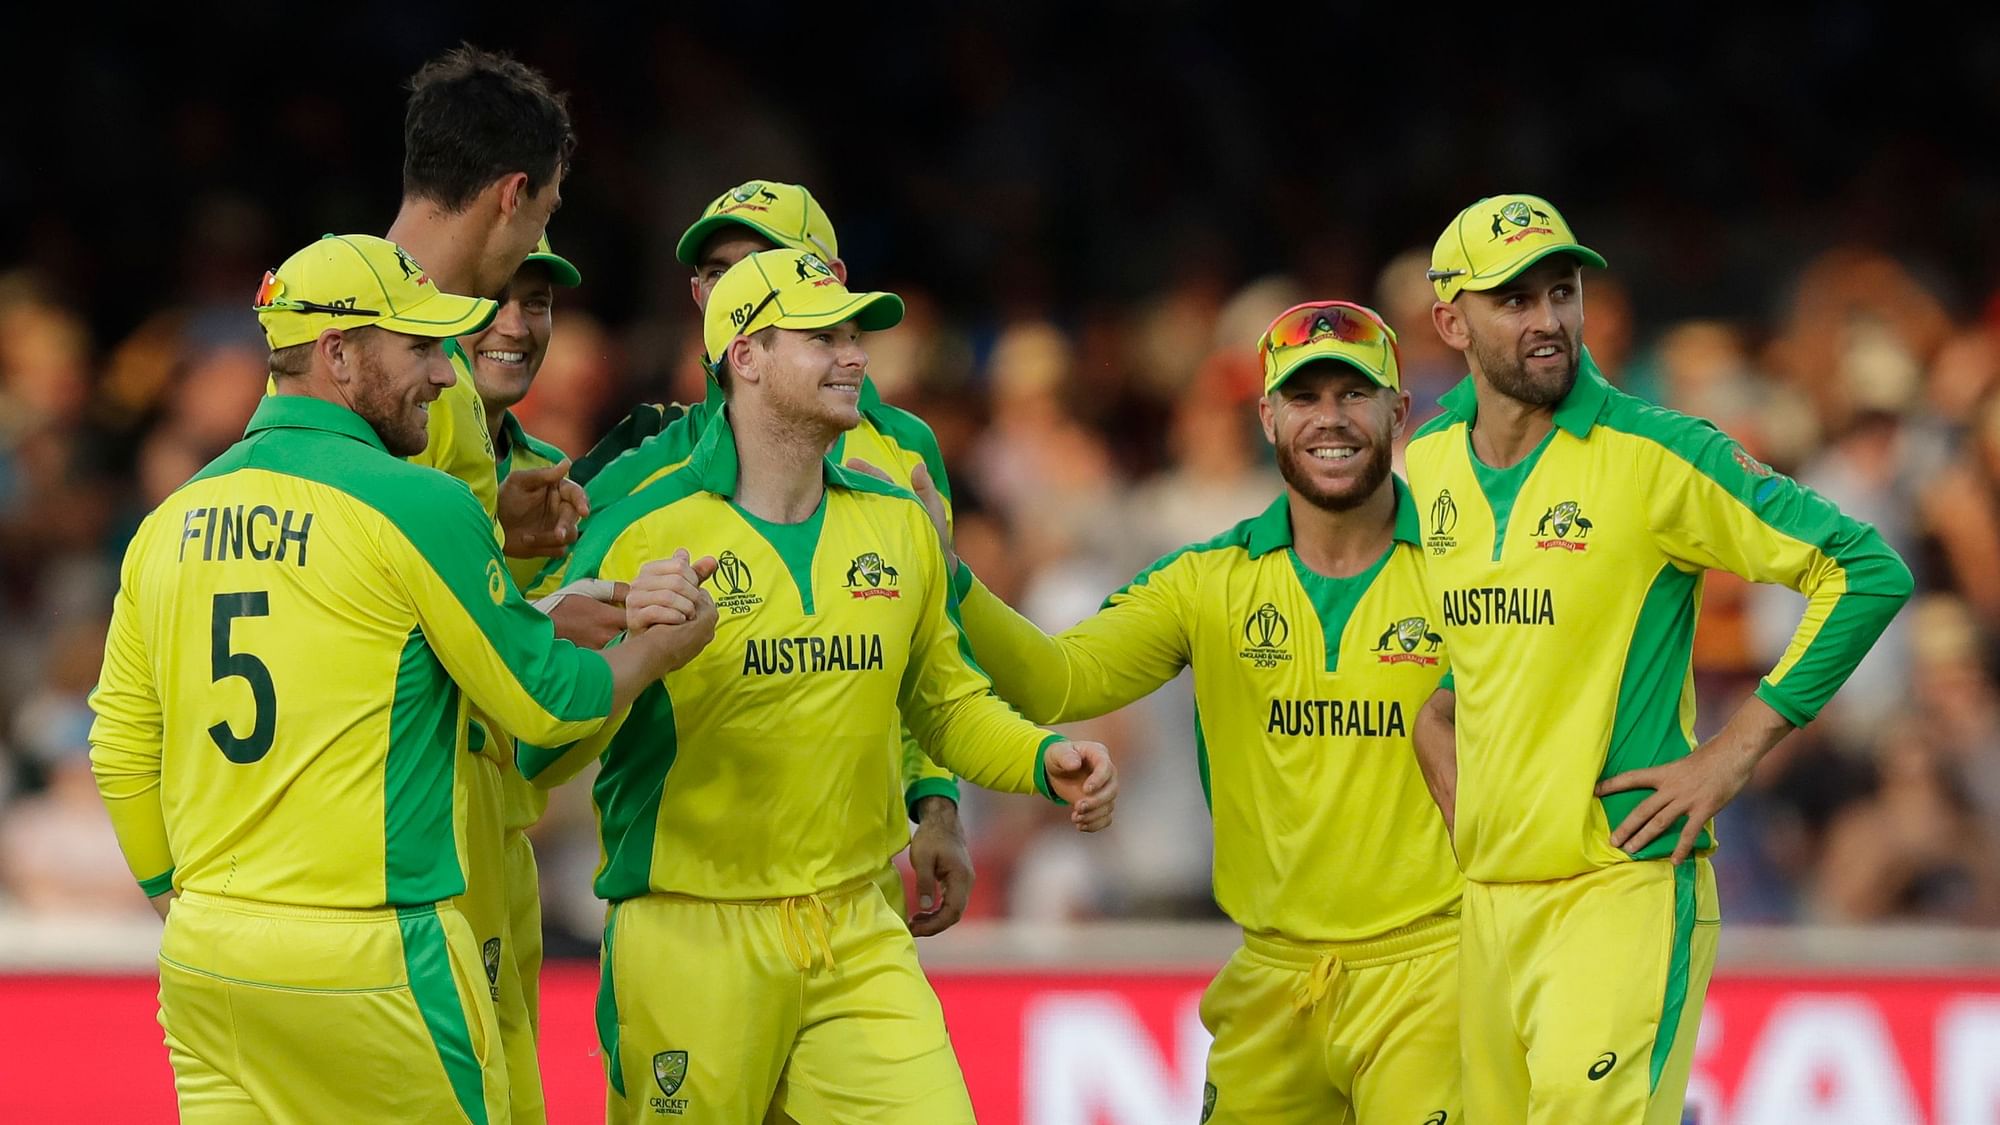 Australia’s players might have been forgiven for briefly easing off amid a long and gruelling Cricket World Cup schedule.